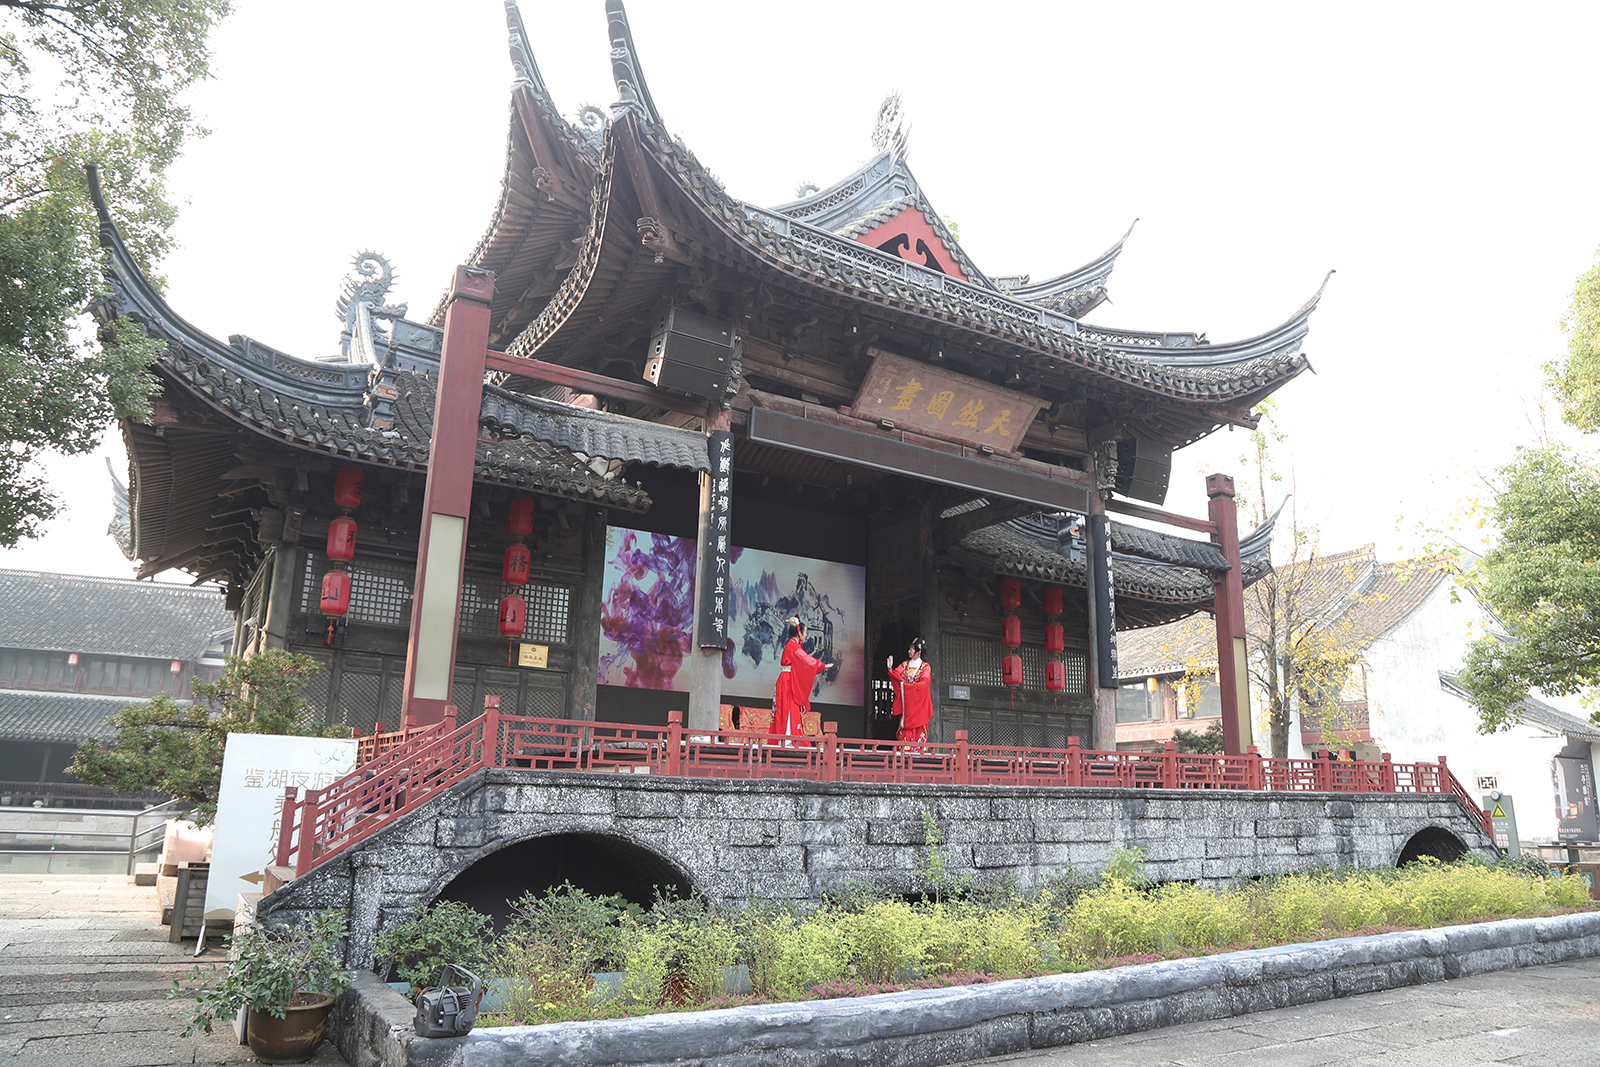 Local opera is performed on a traditional stage in Luzhen in Shaoxing, Zhejiang Province. /CGTN